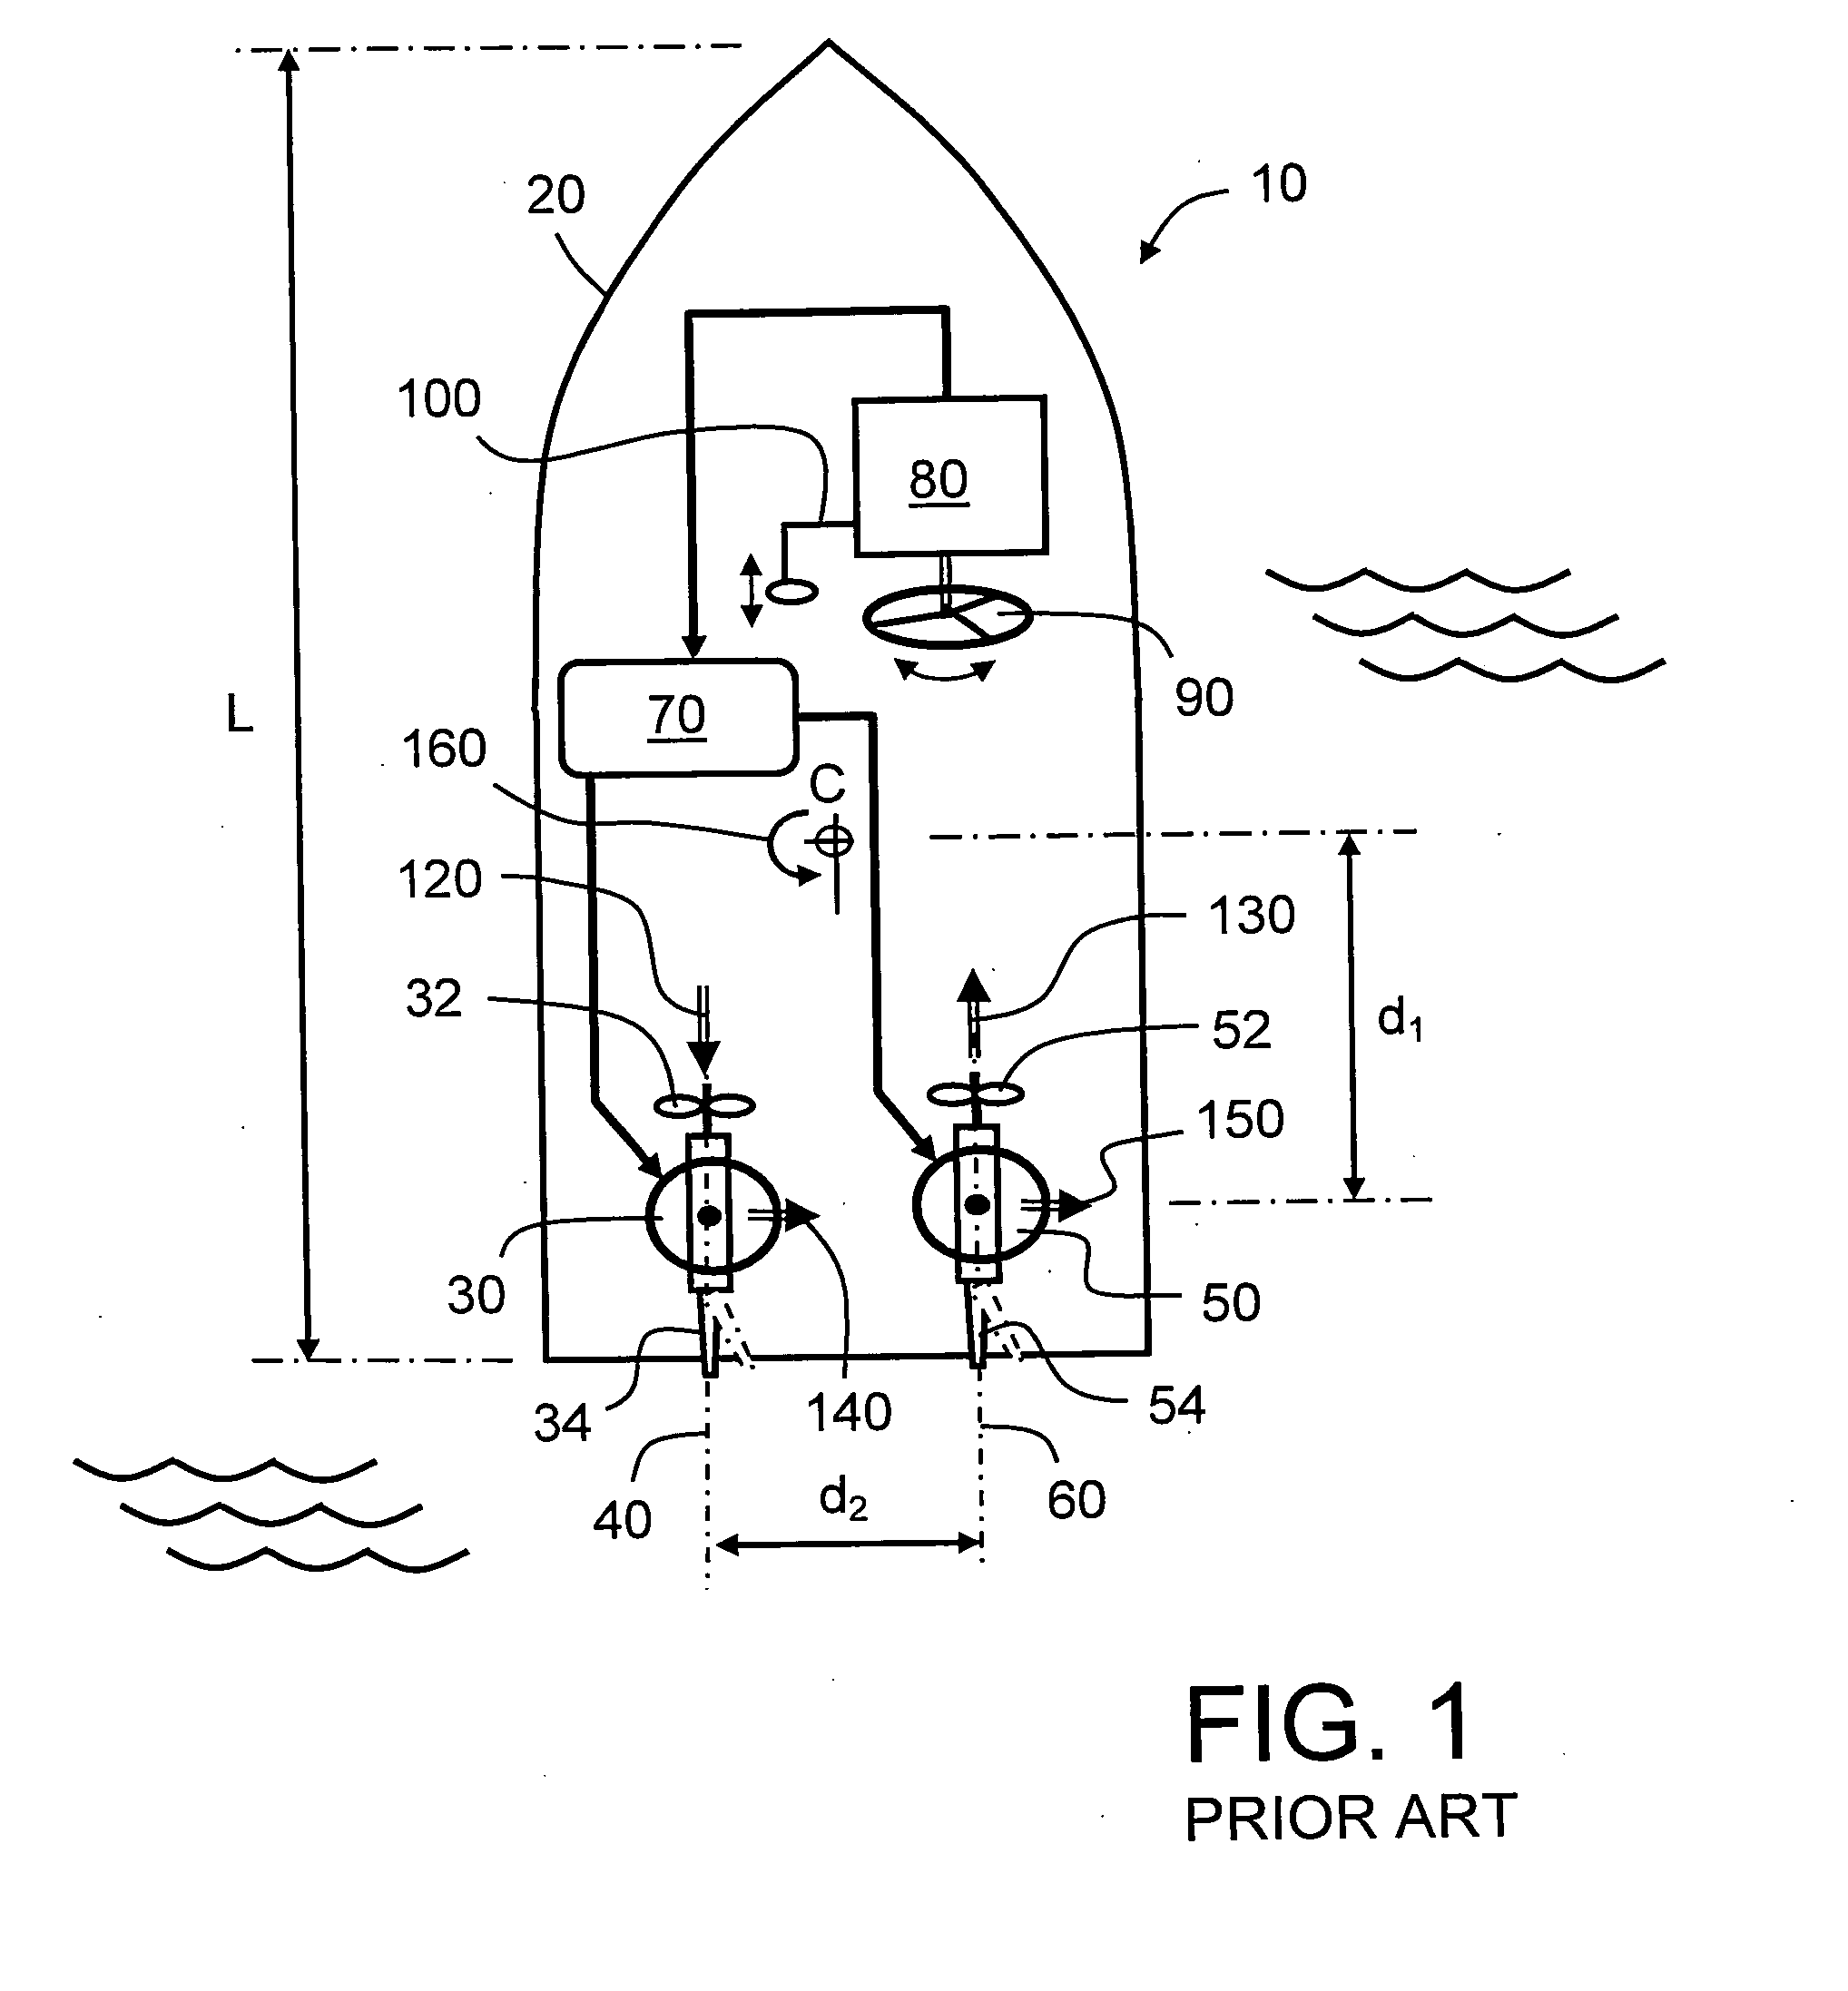 Method and system for maneuvering aquatic vessels